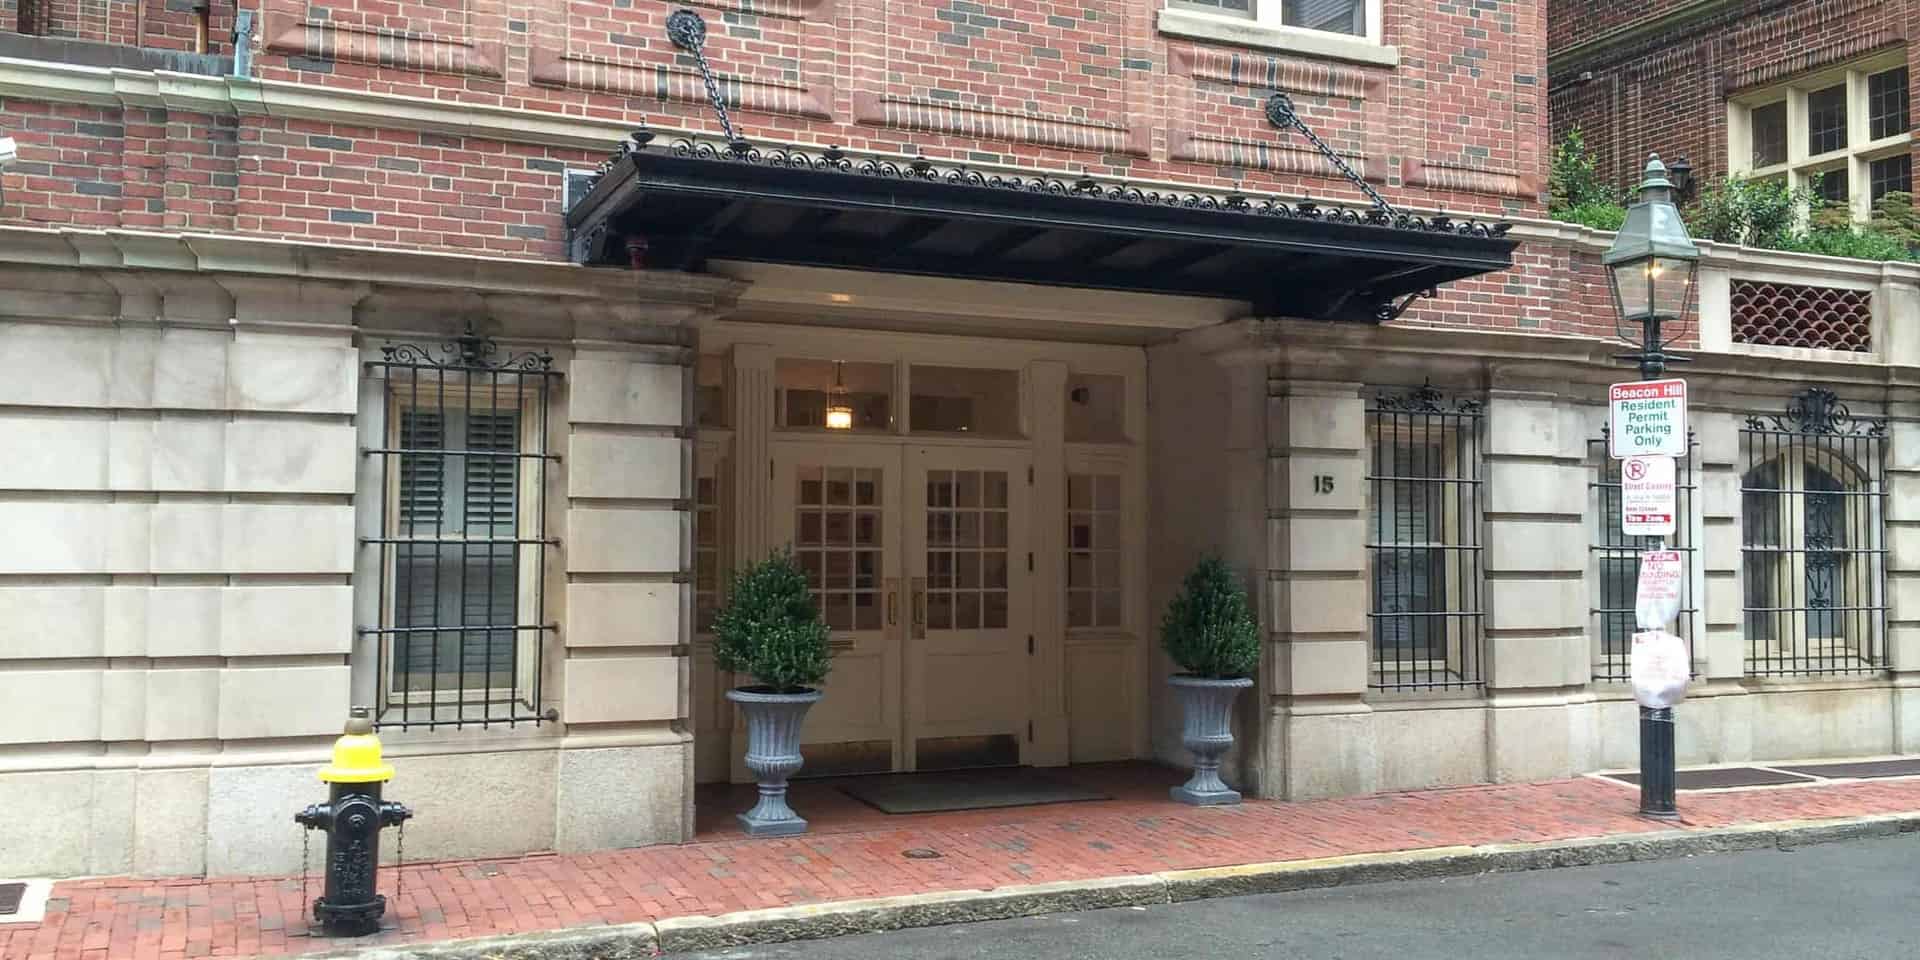 About — Beacon Hill Hotel